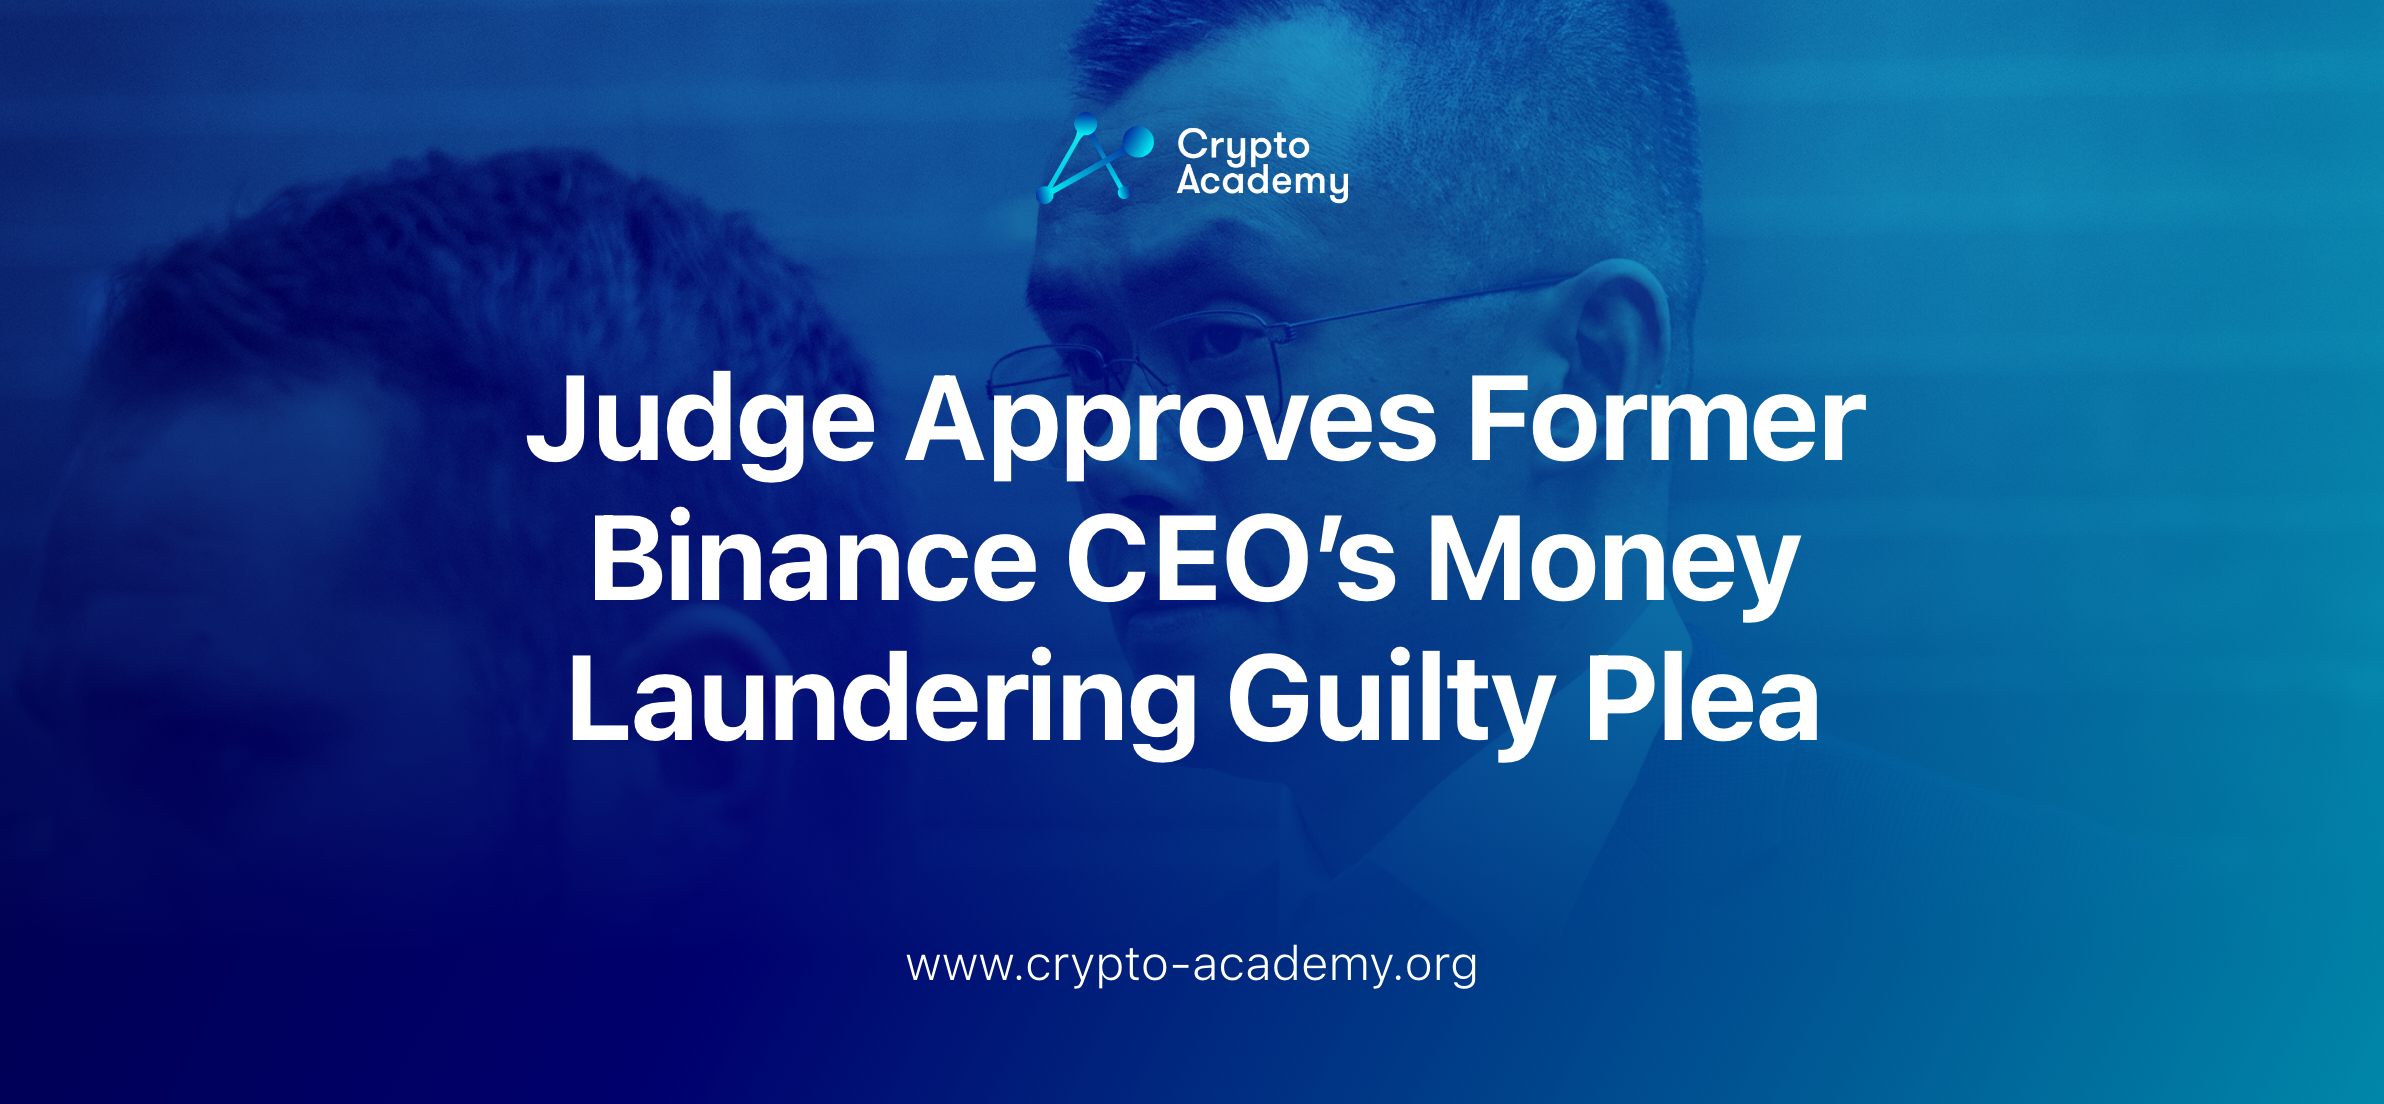 Judge Approves Former Binance CEO's Money Laundering Guilty Plea